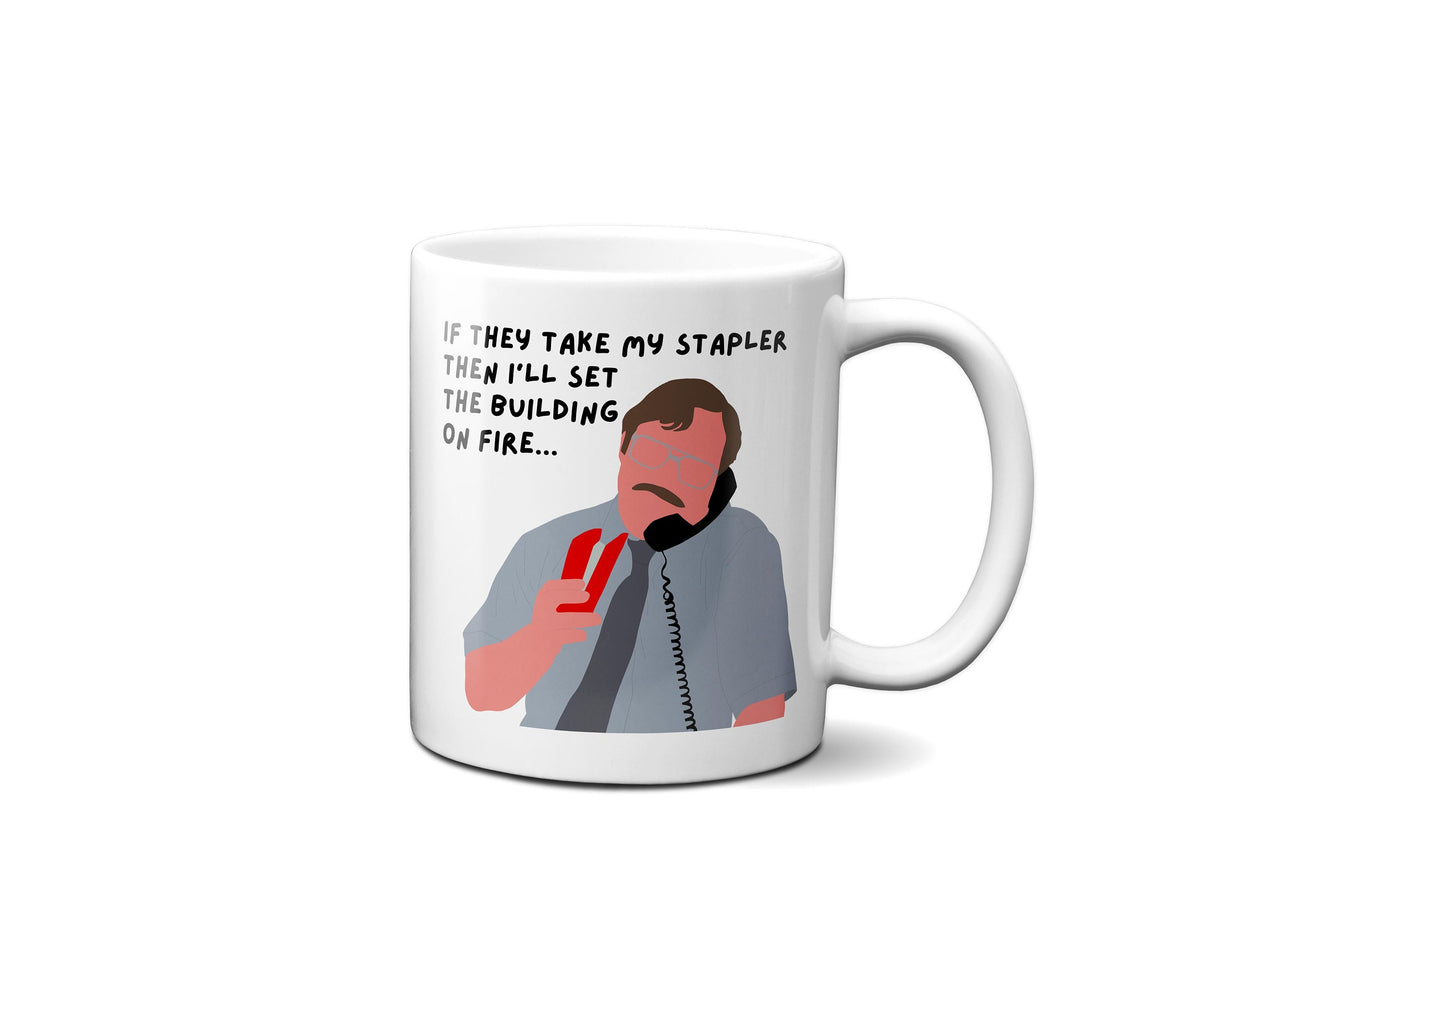 If they take my stapler I'll set the building on fire | Milton Waddams Quote Mug | Office Space Mug